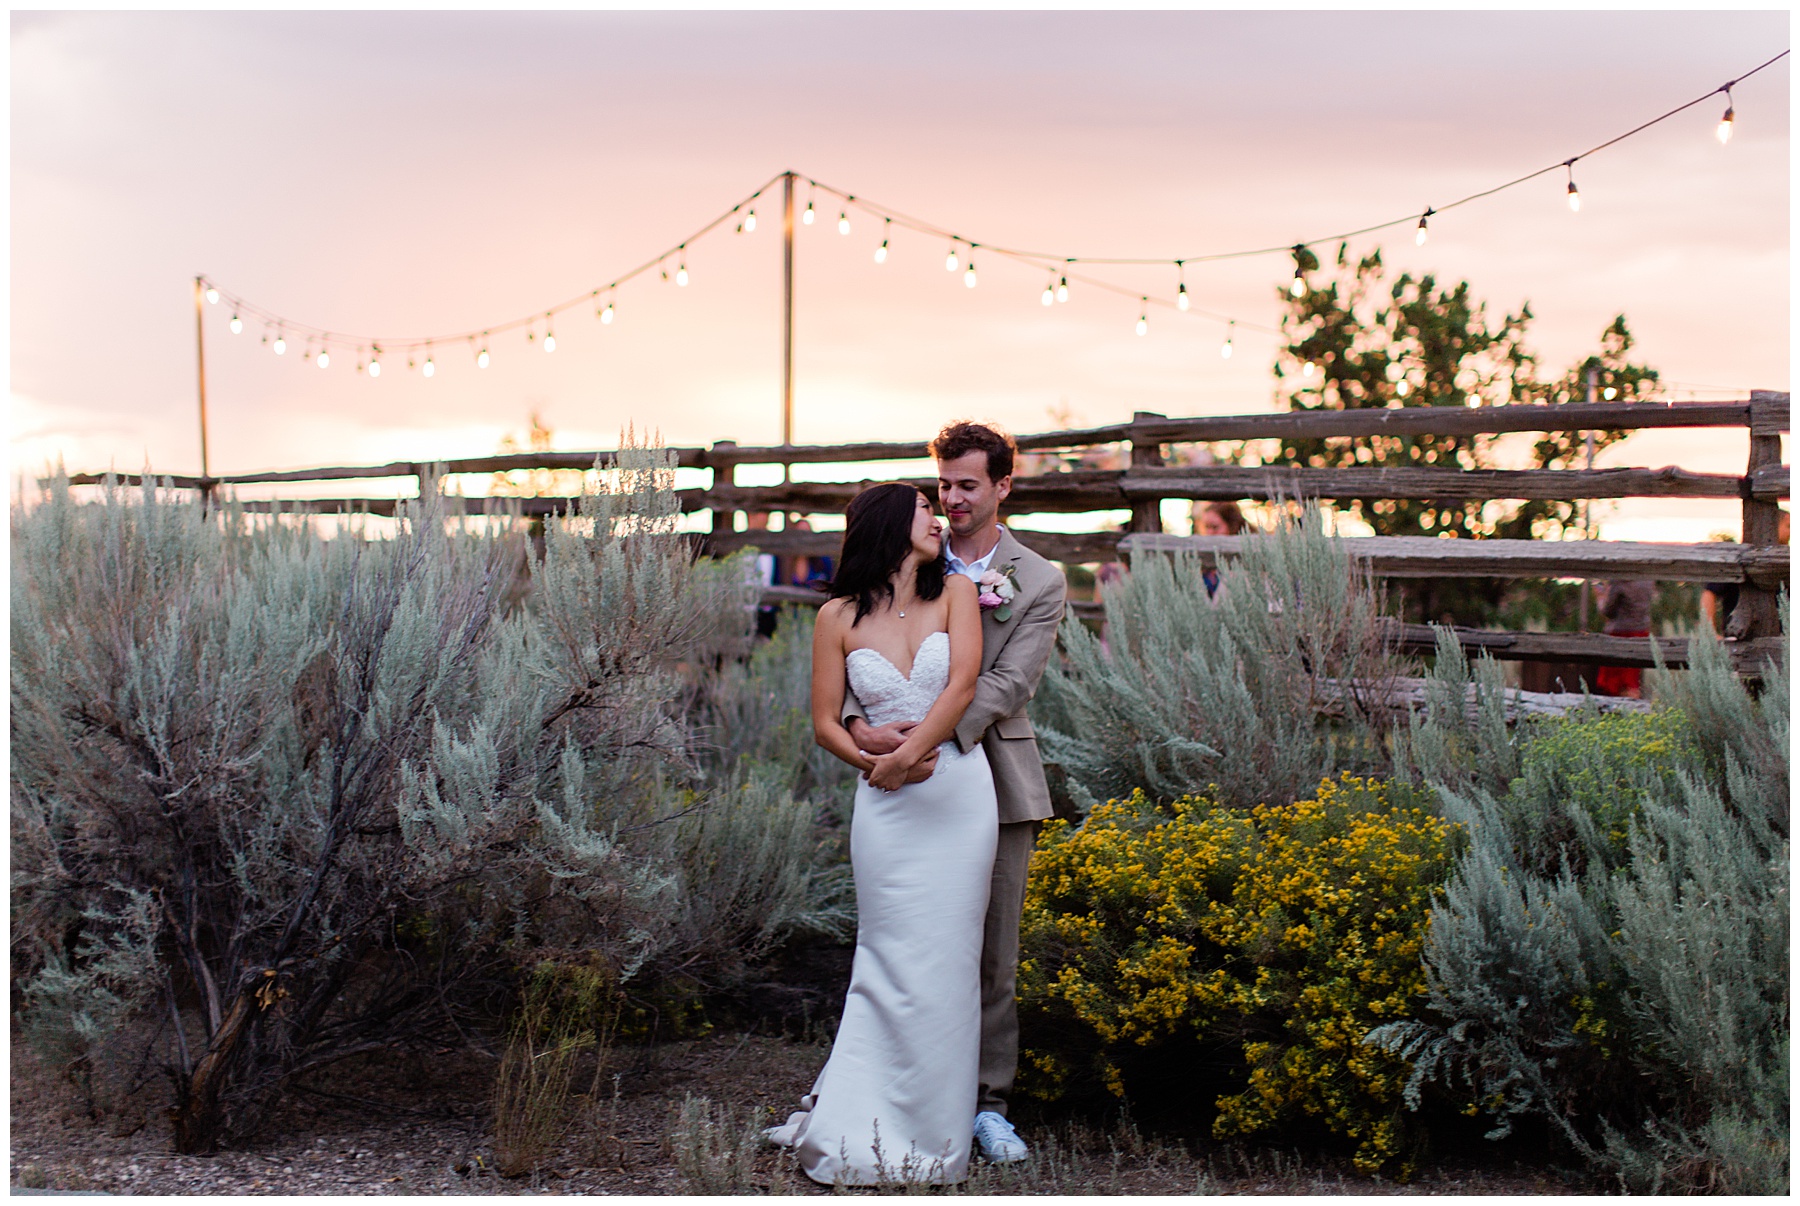 The happily married couple taking a portrait against the bushes with the warm sun setting in the distance. 